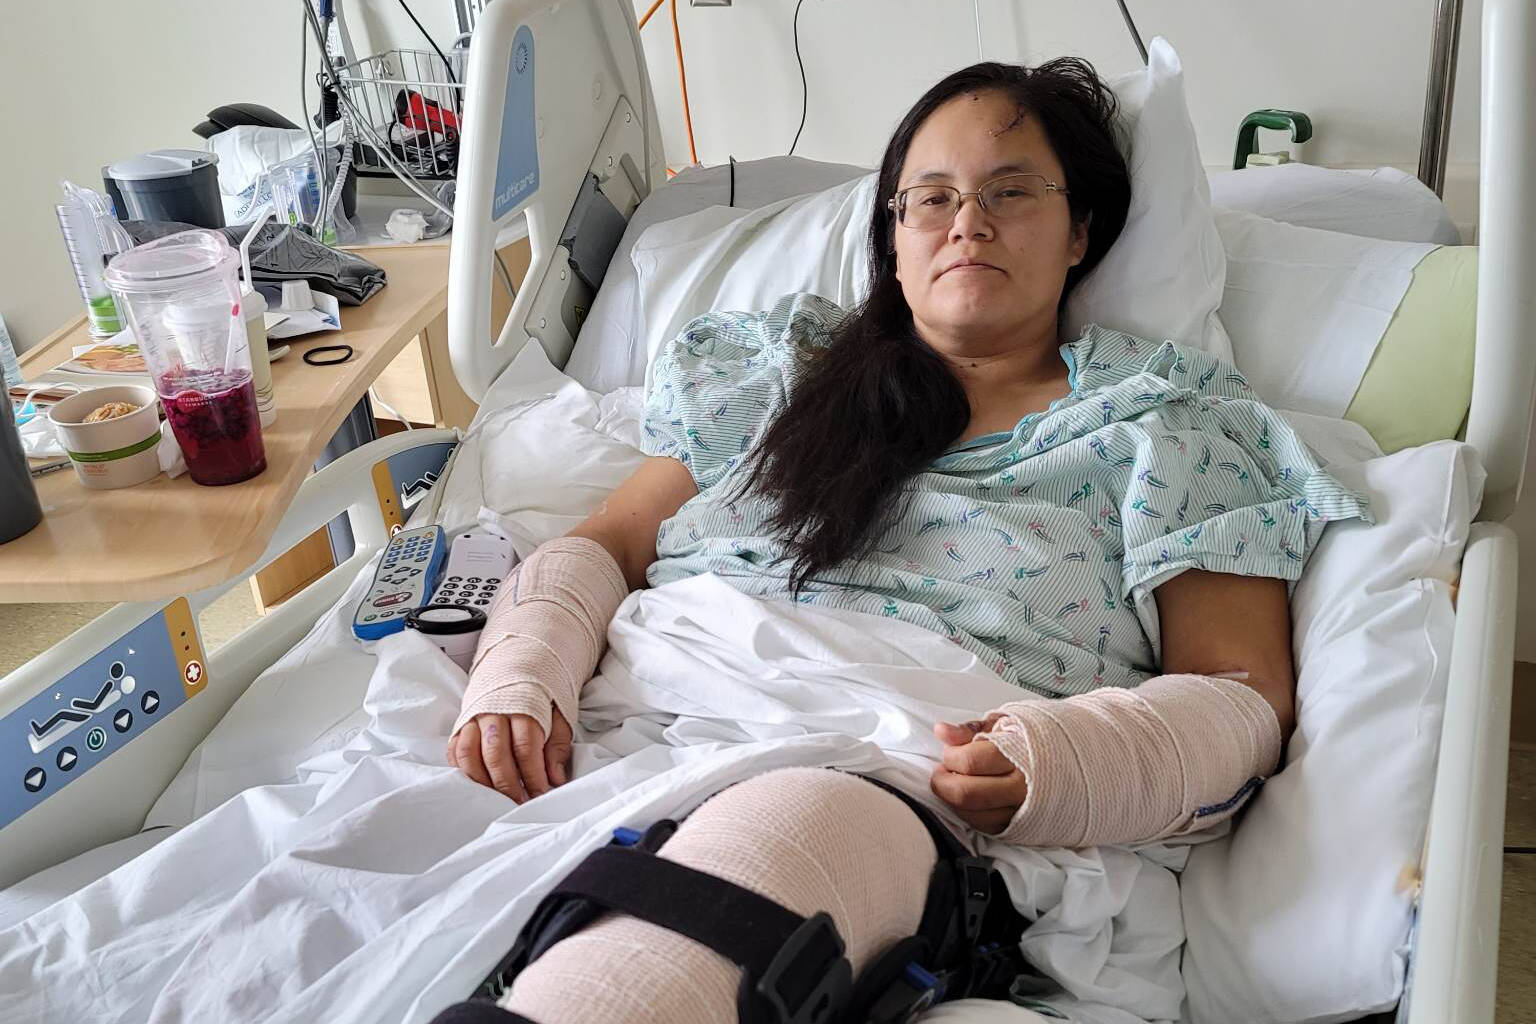 Lareina Lucas was in a Washington State hospital for almost a week with broken bones after a vehicle collision on April 8. Photo courtesy Ha-Shilth-Sa/(Submitted photo)